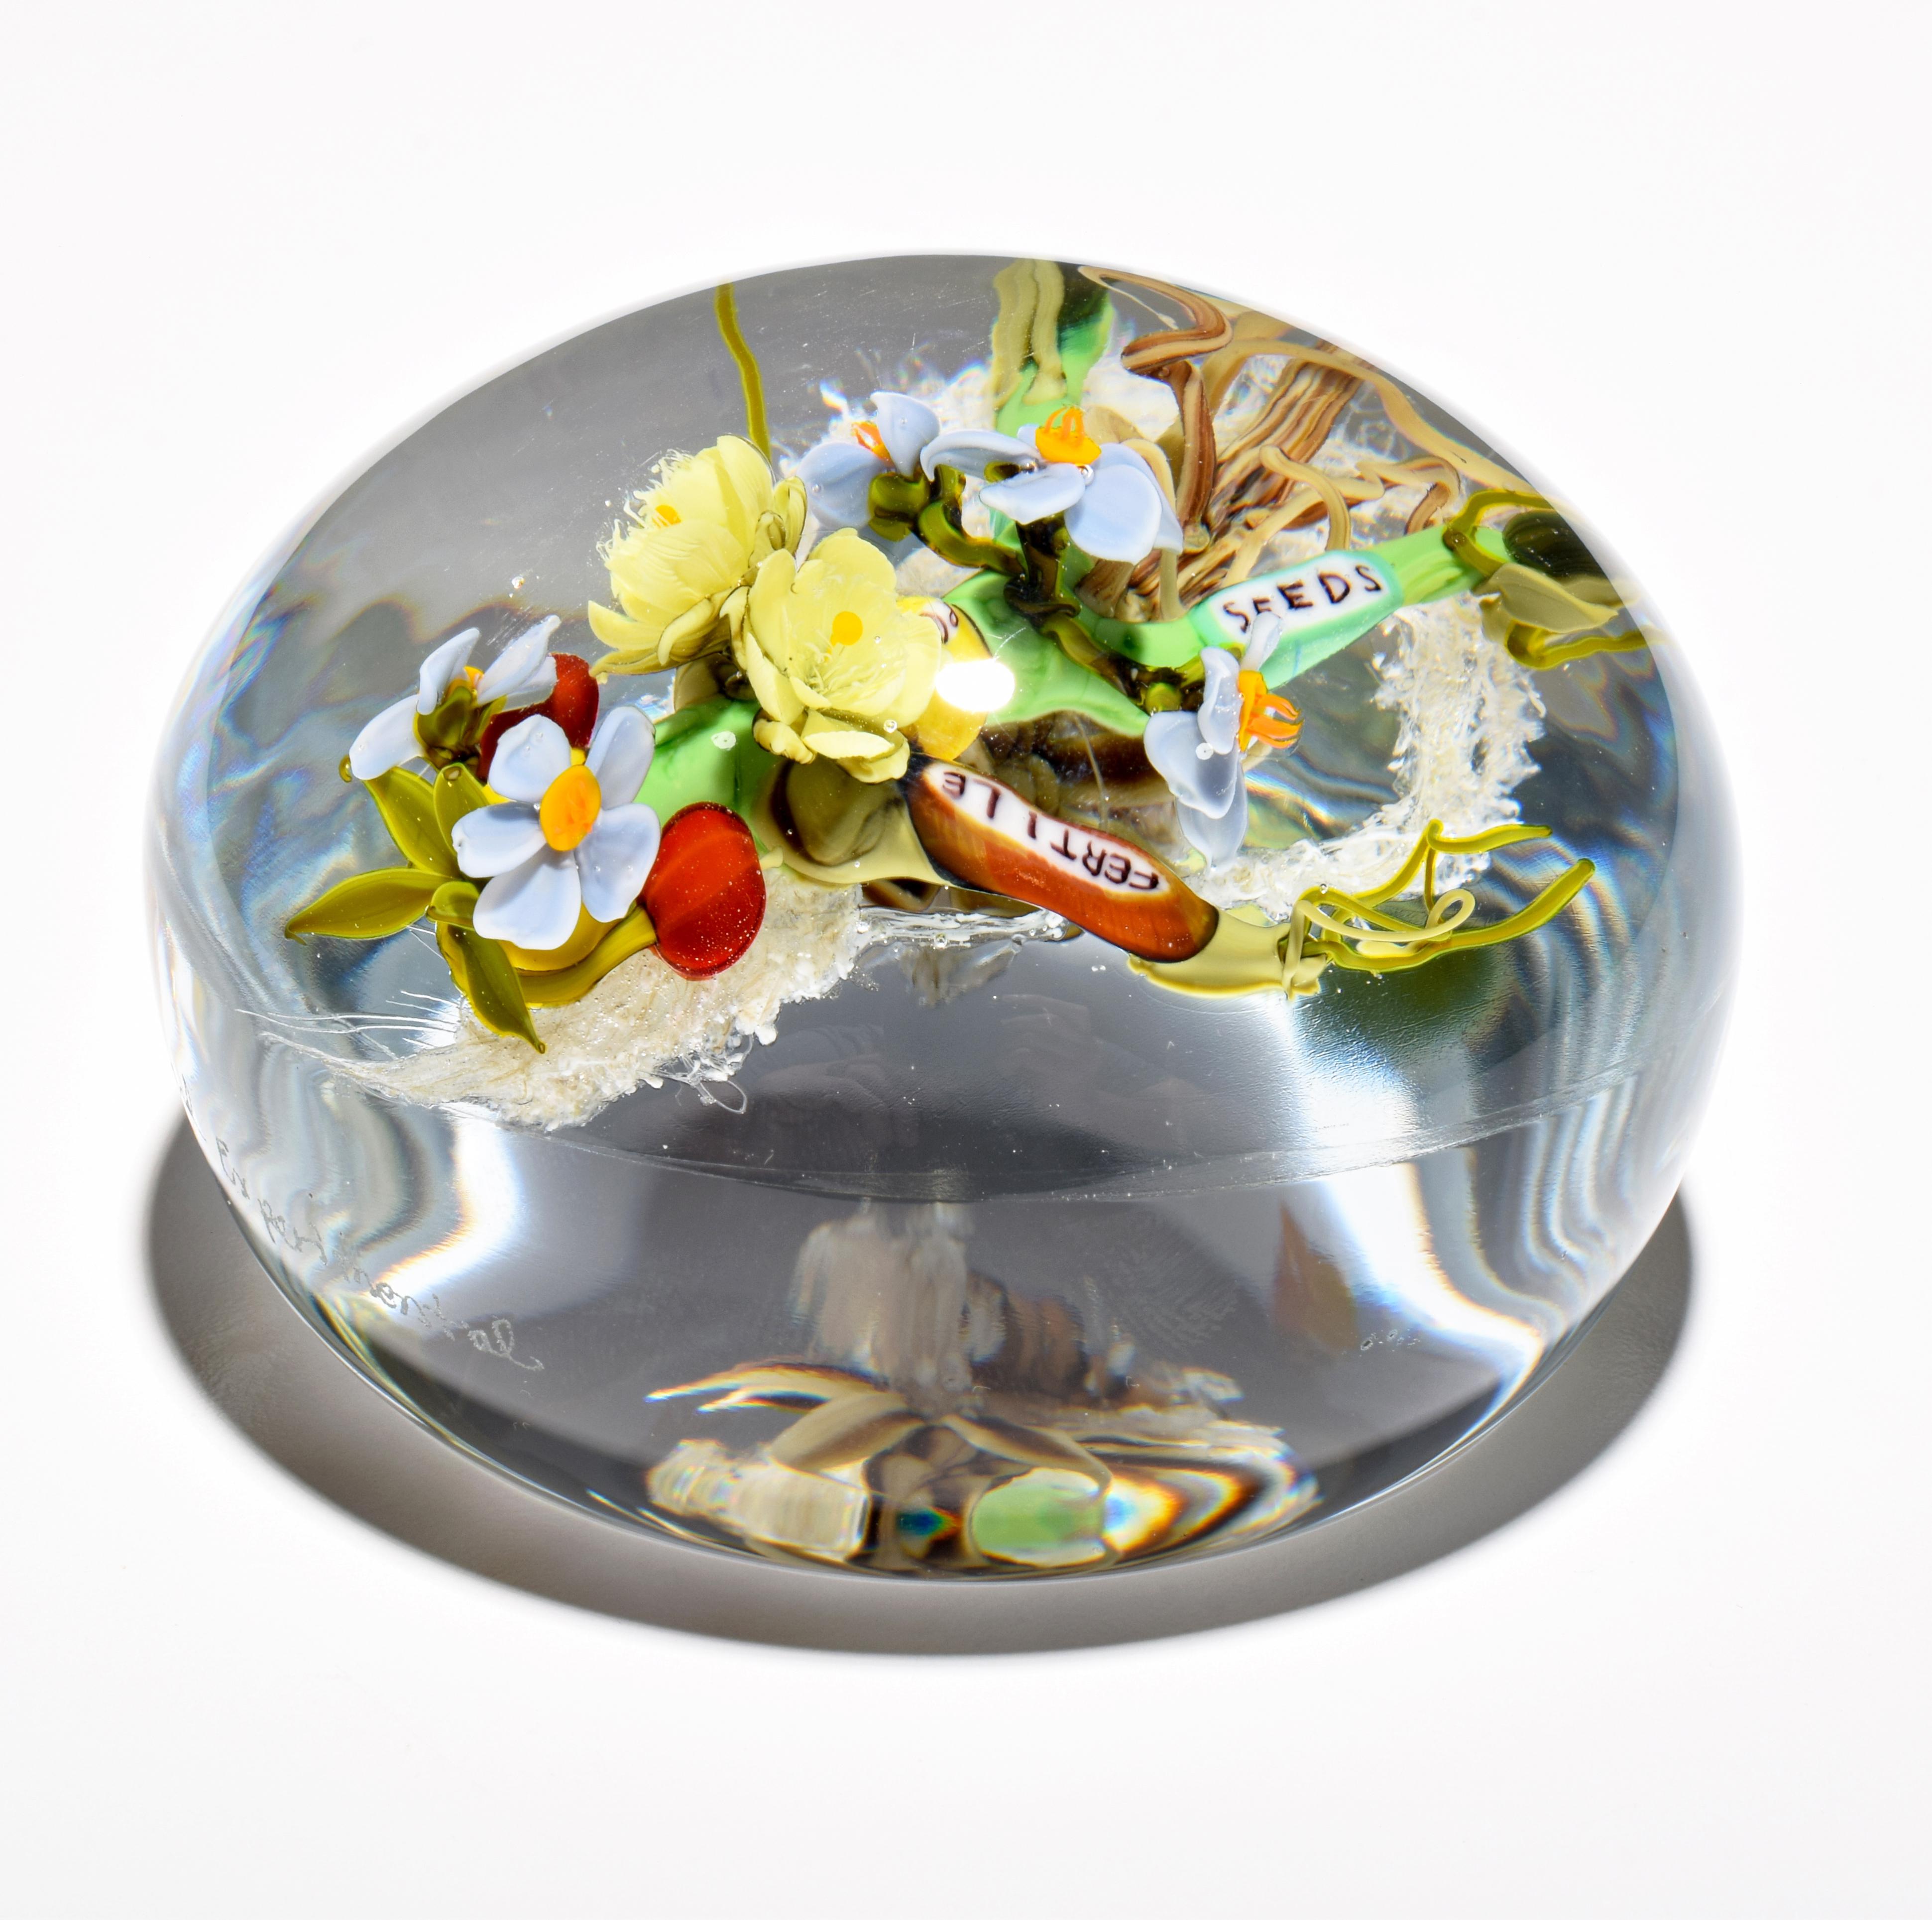 Additional Information: Provenance: Private Collection, Palm Beach, Florida. “What Walt Whitman did with words, I seek to do in glass on a visual level. My passion is to articulate fresh information celebrating nature through glass art. My work is